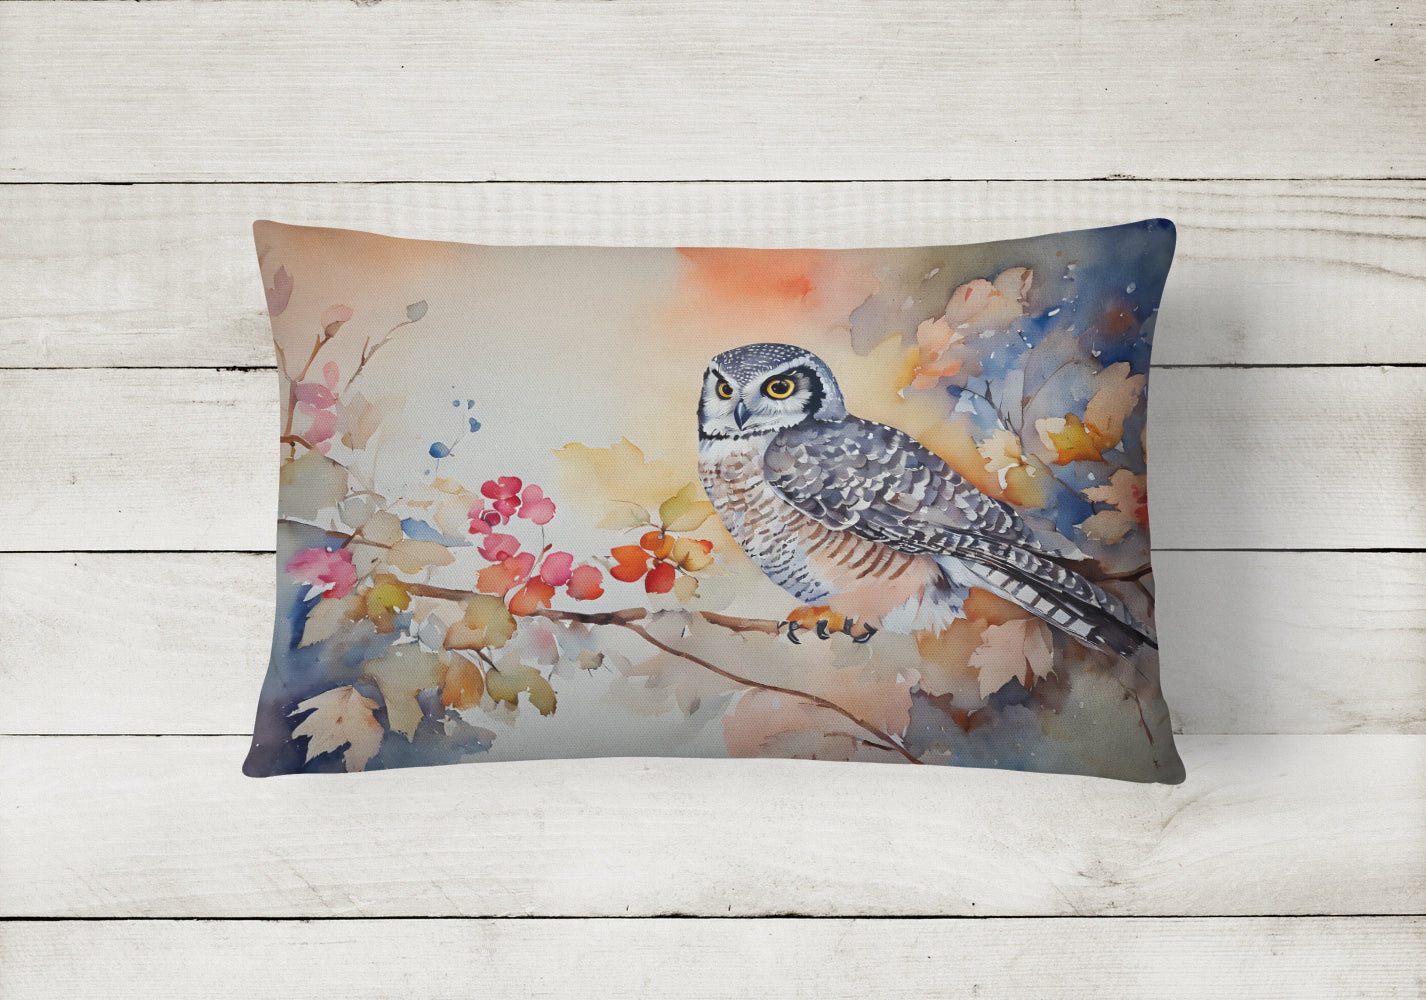 Buy this Northern Hawk Owl Throw Pillow